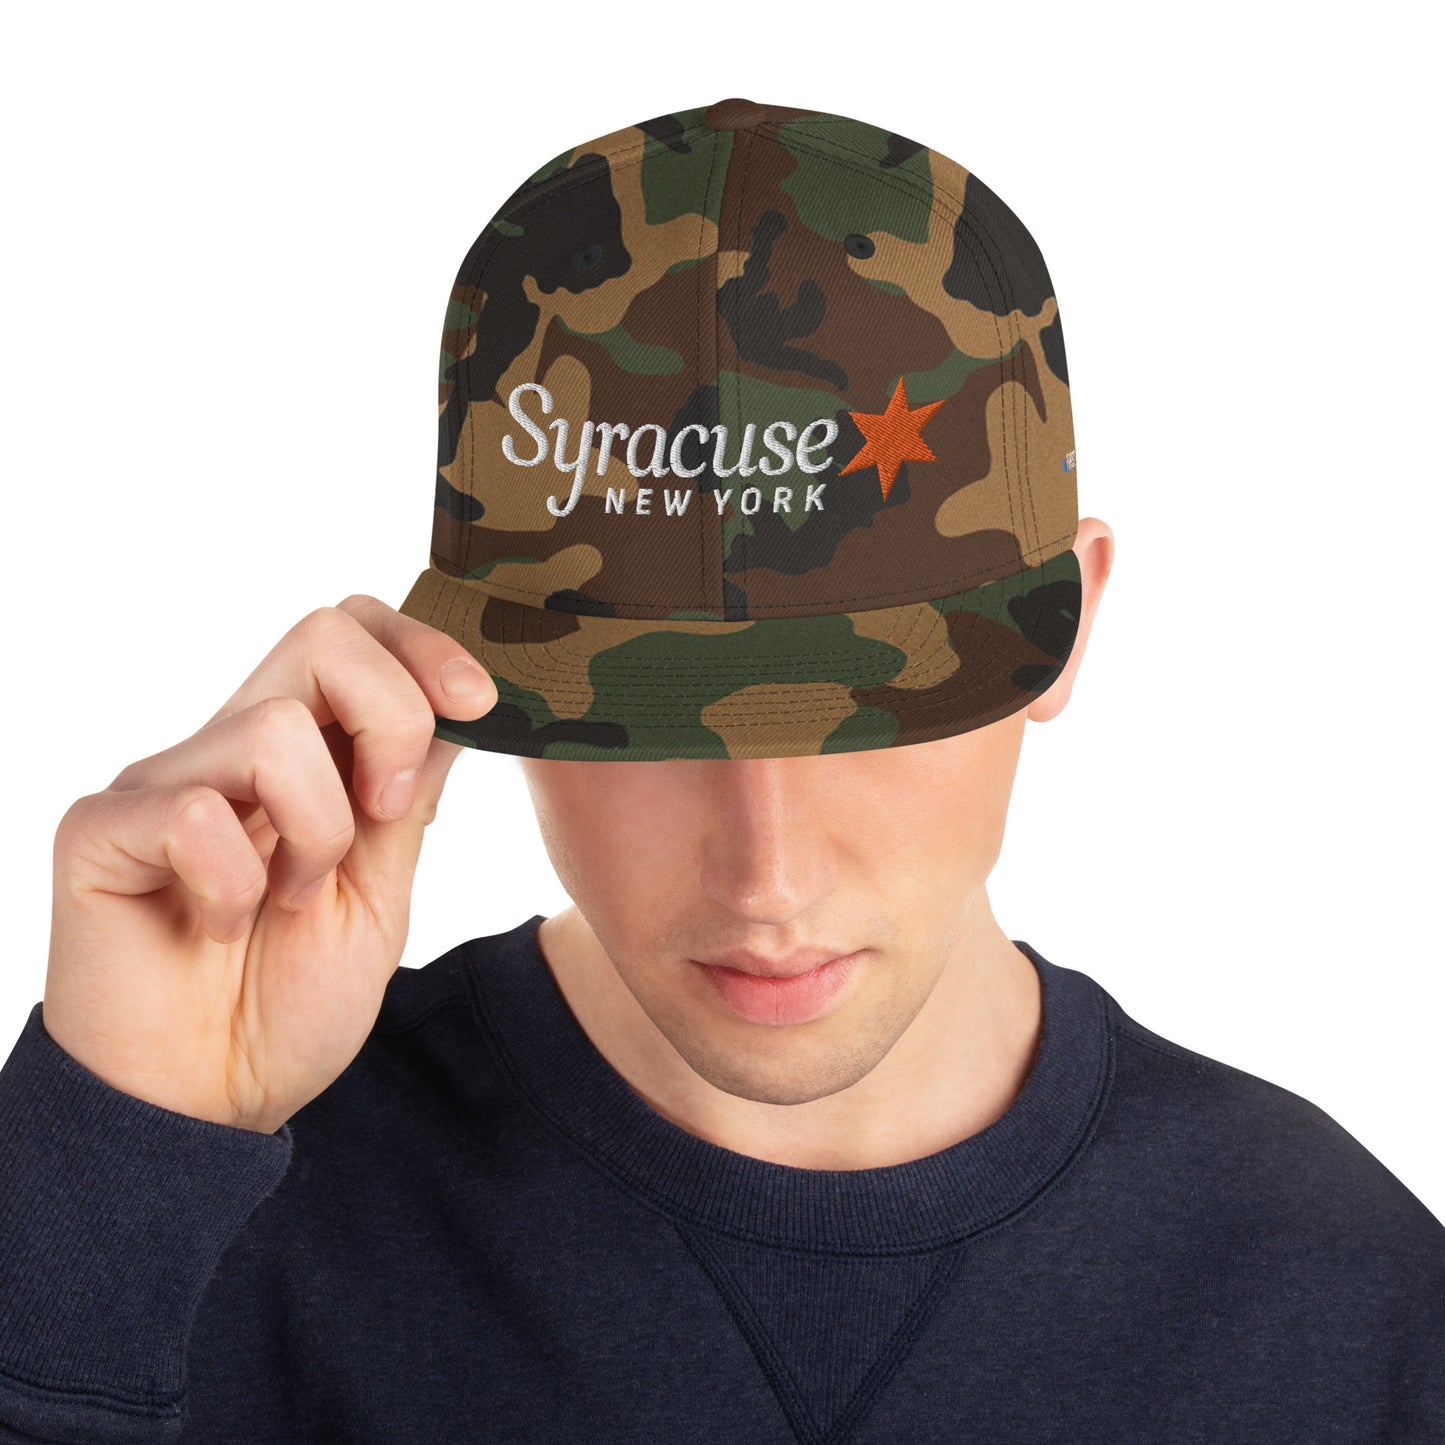 A man facing us wearing a green camouflage Syracuse, NY city flag hat with an embroidered Syracuse, NY logo